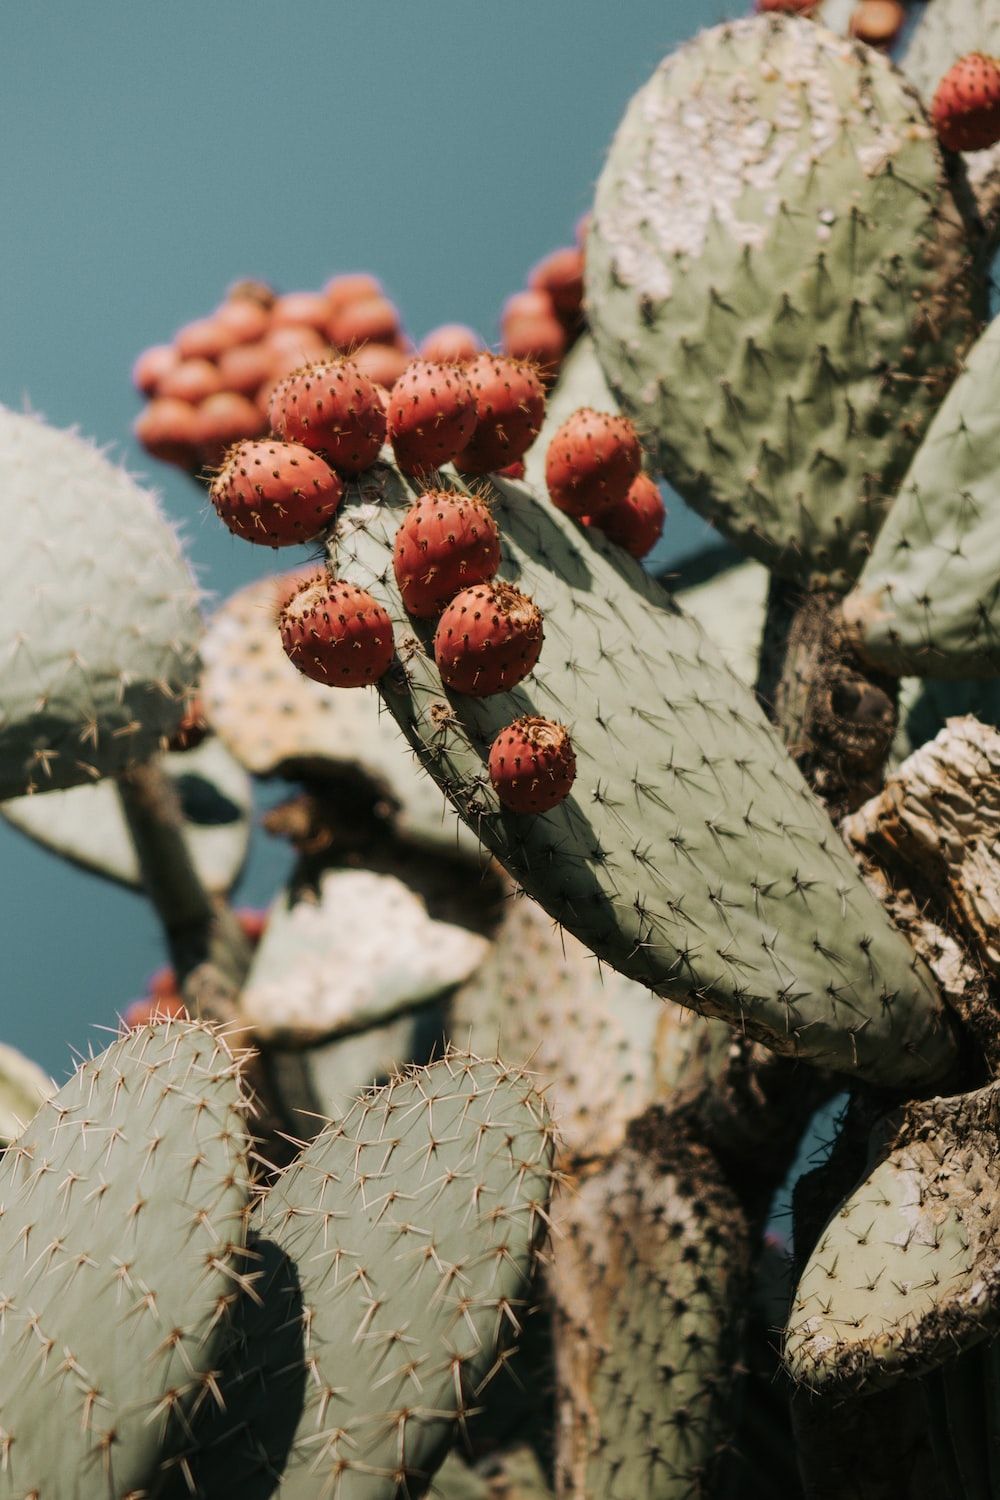 A cactus with red fruit on it - Cactus